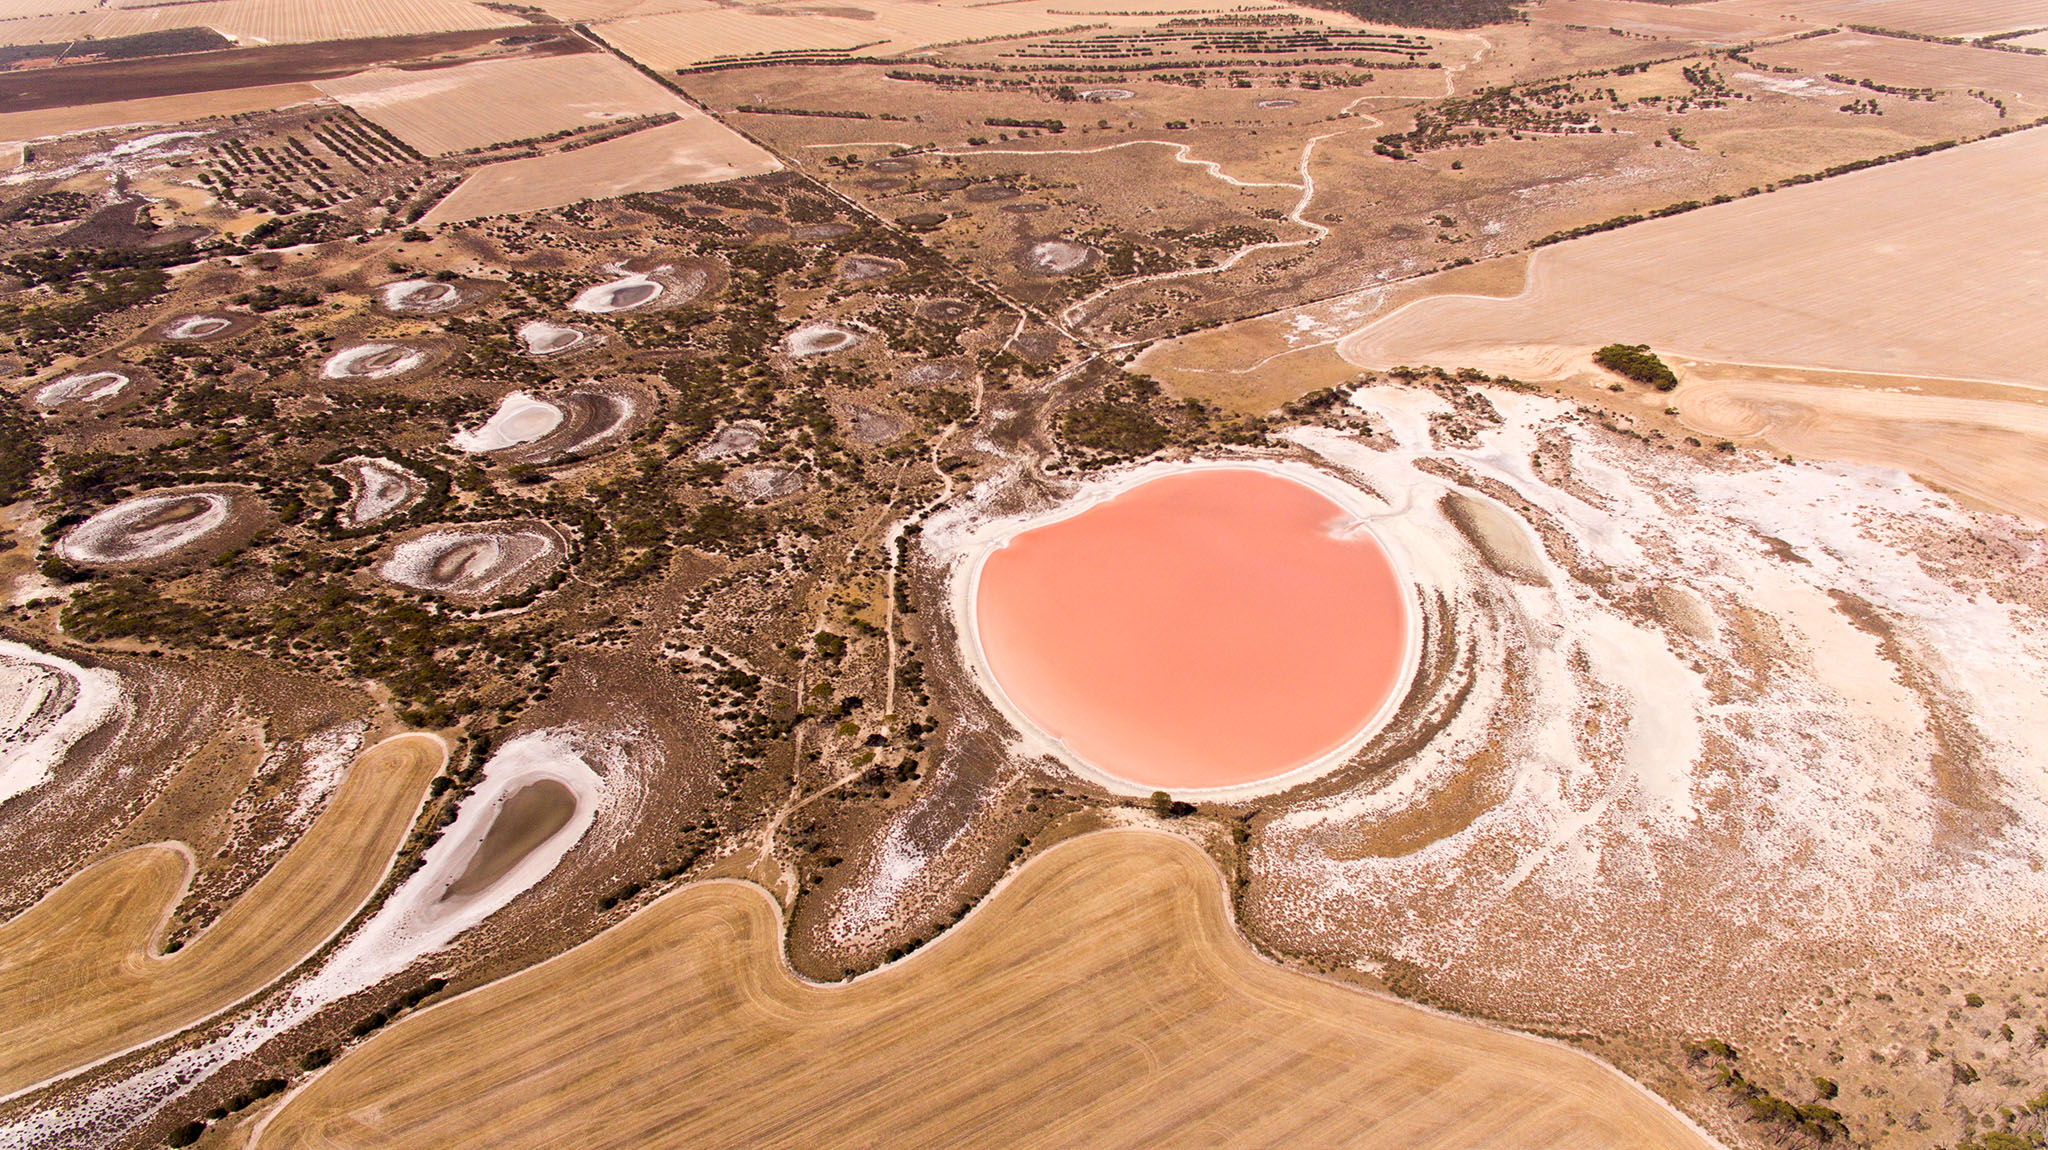 A pink salt lake creates a striking impact in this aerial landscape photo by Caro Telfer, photographer.